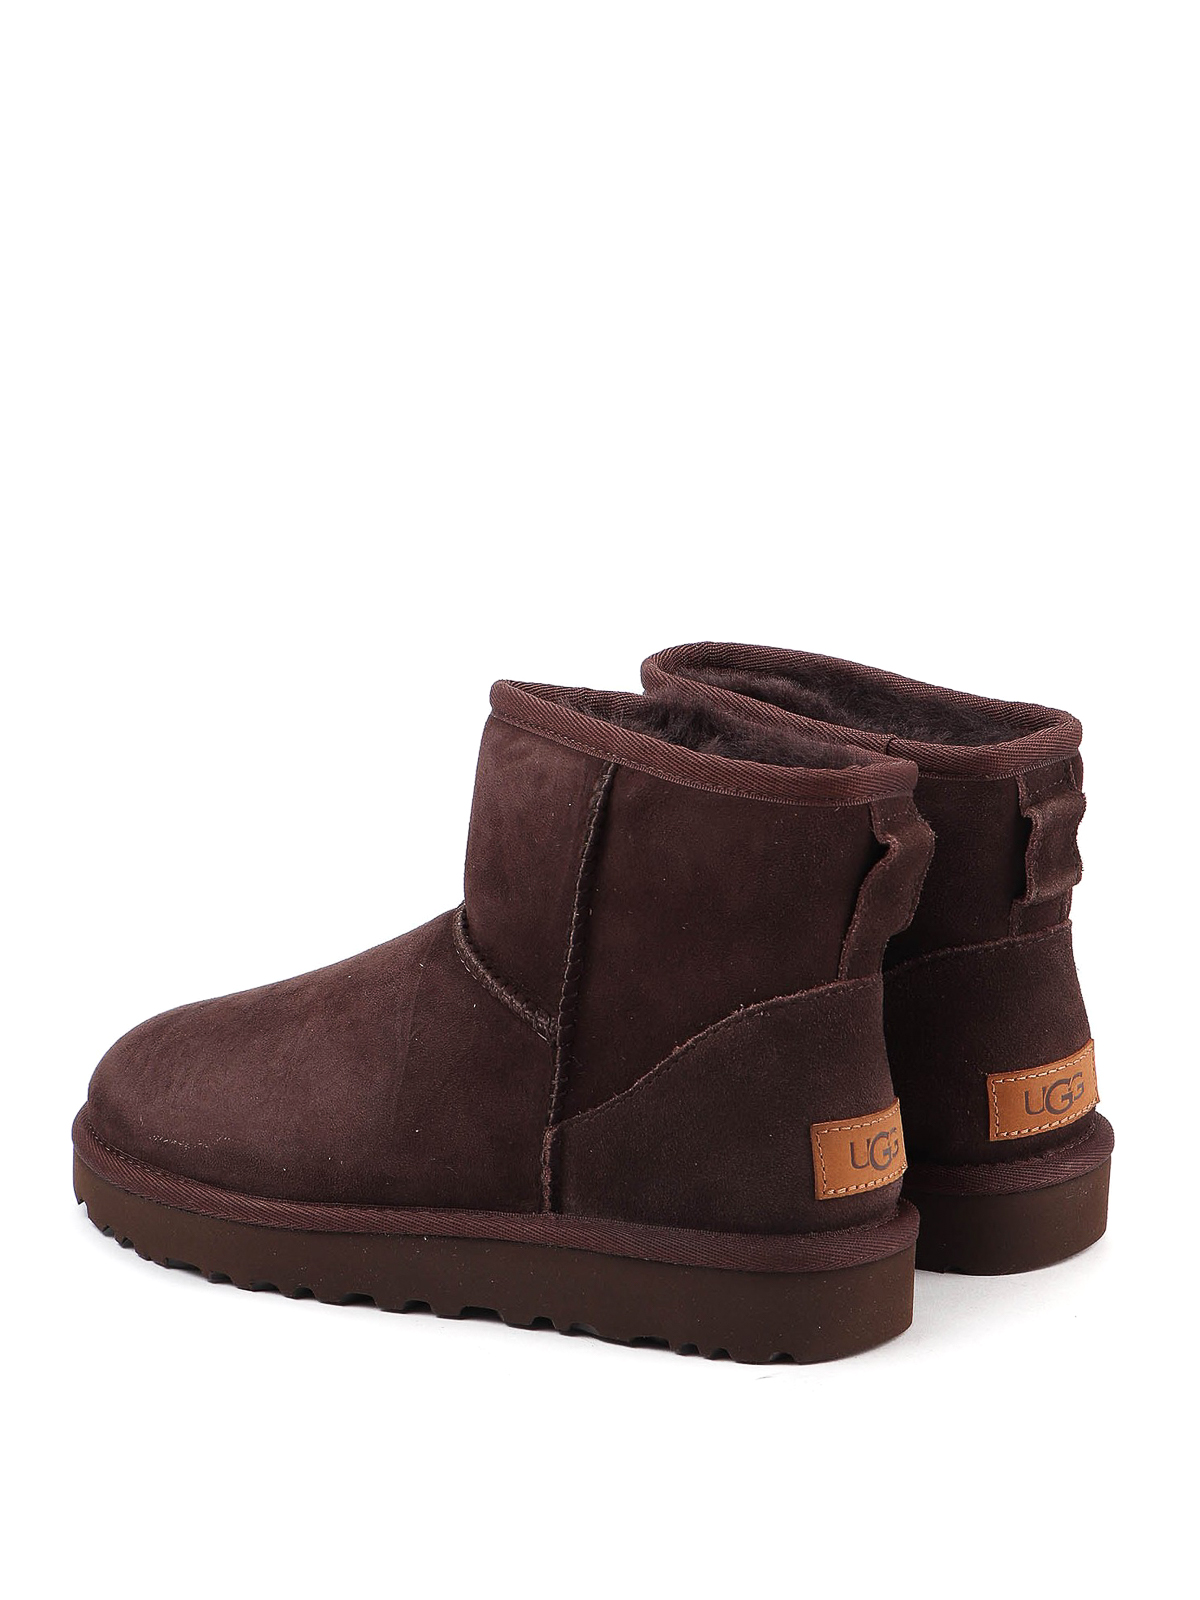 Above head and shoulder crude oil meet Ankle boots Ugg - Classic Mini II ankle boots - 1016222WCHOCOLATE